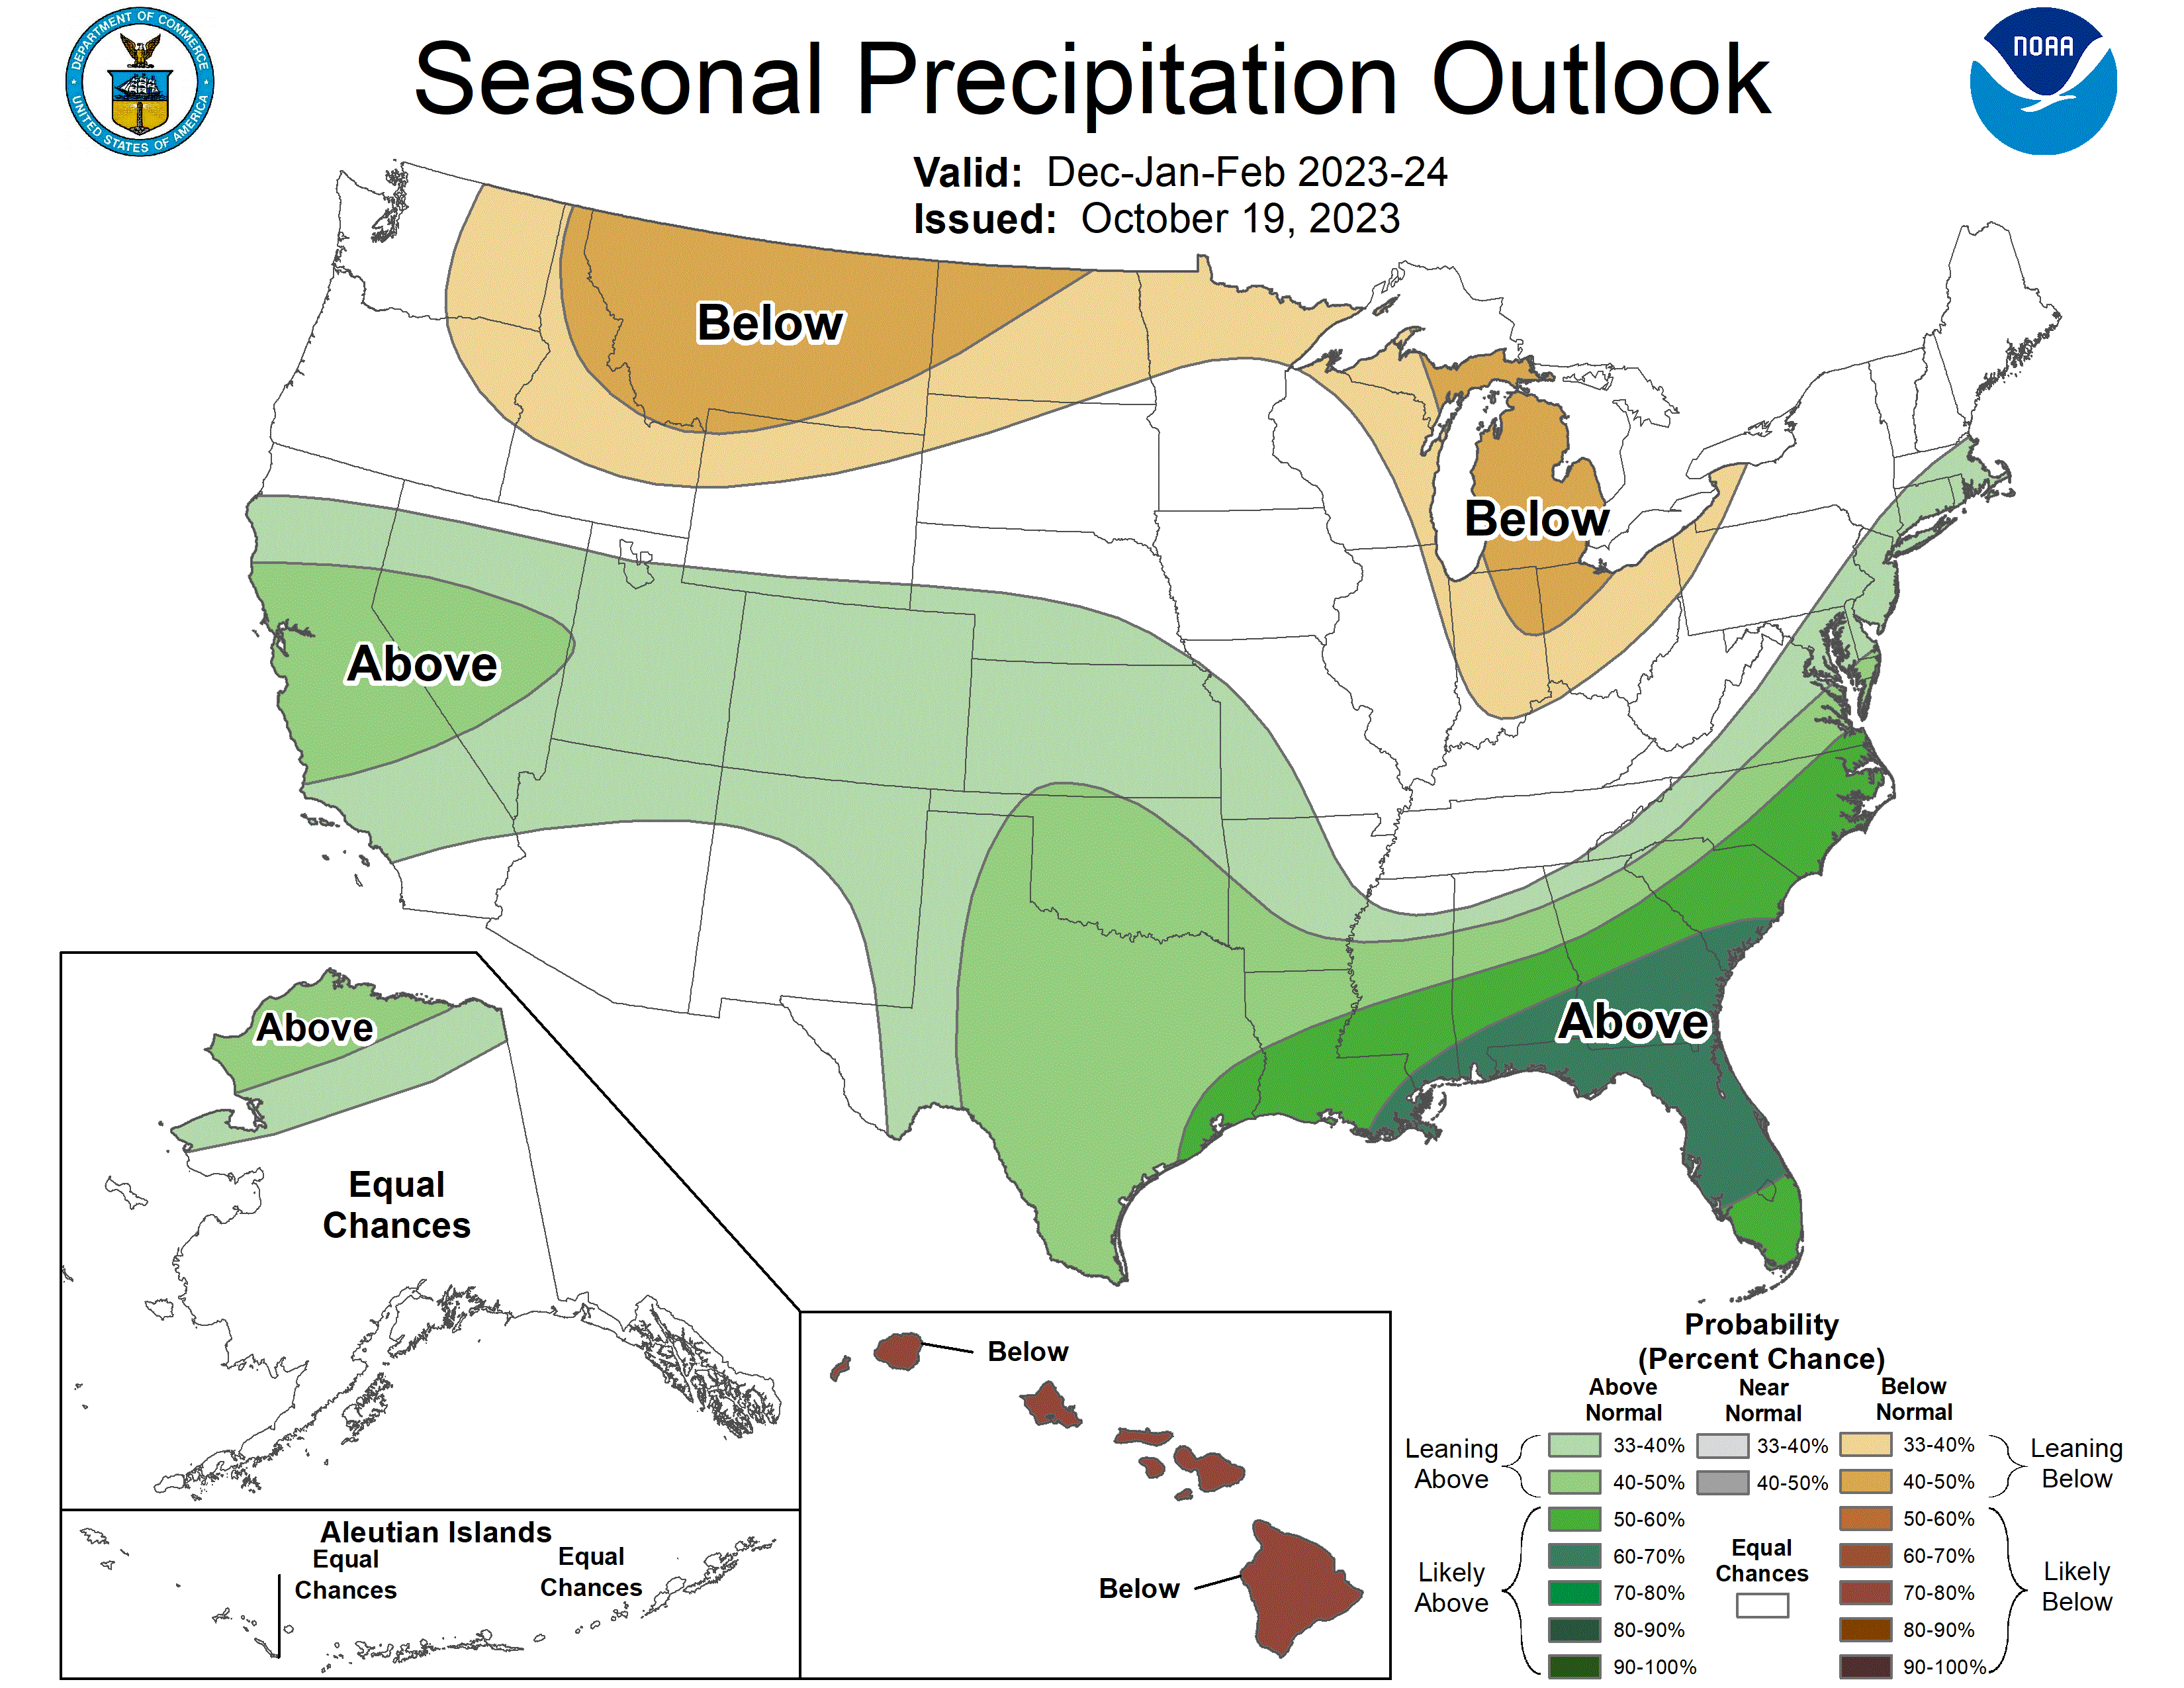 Image showing the 2023-2024 U.S. Winter Outlook map for precipitation shows wetter-than-average conditions are most likely across the South and Southeast and parts of California and Nevada. Drier-than-average conditions are forecast for parts of the northern tier of the United States.